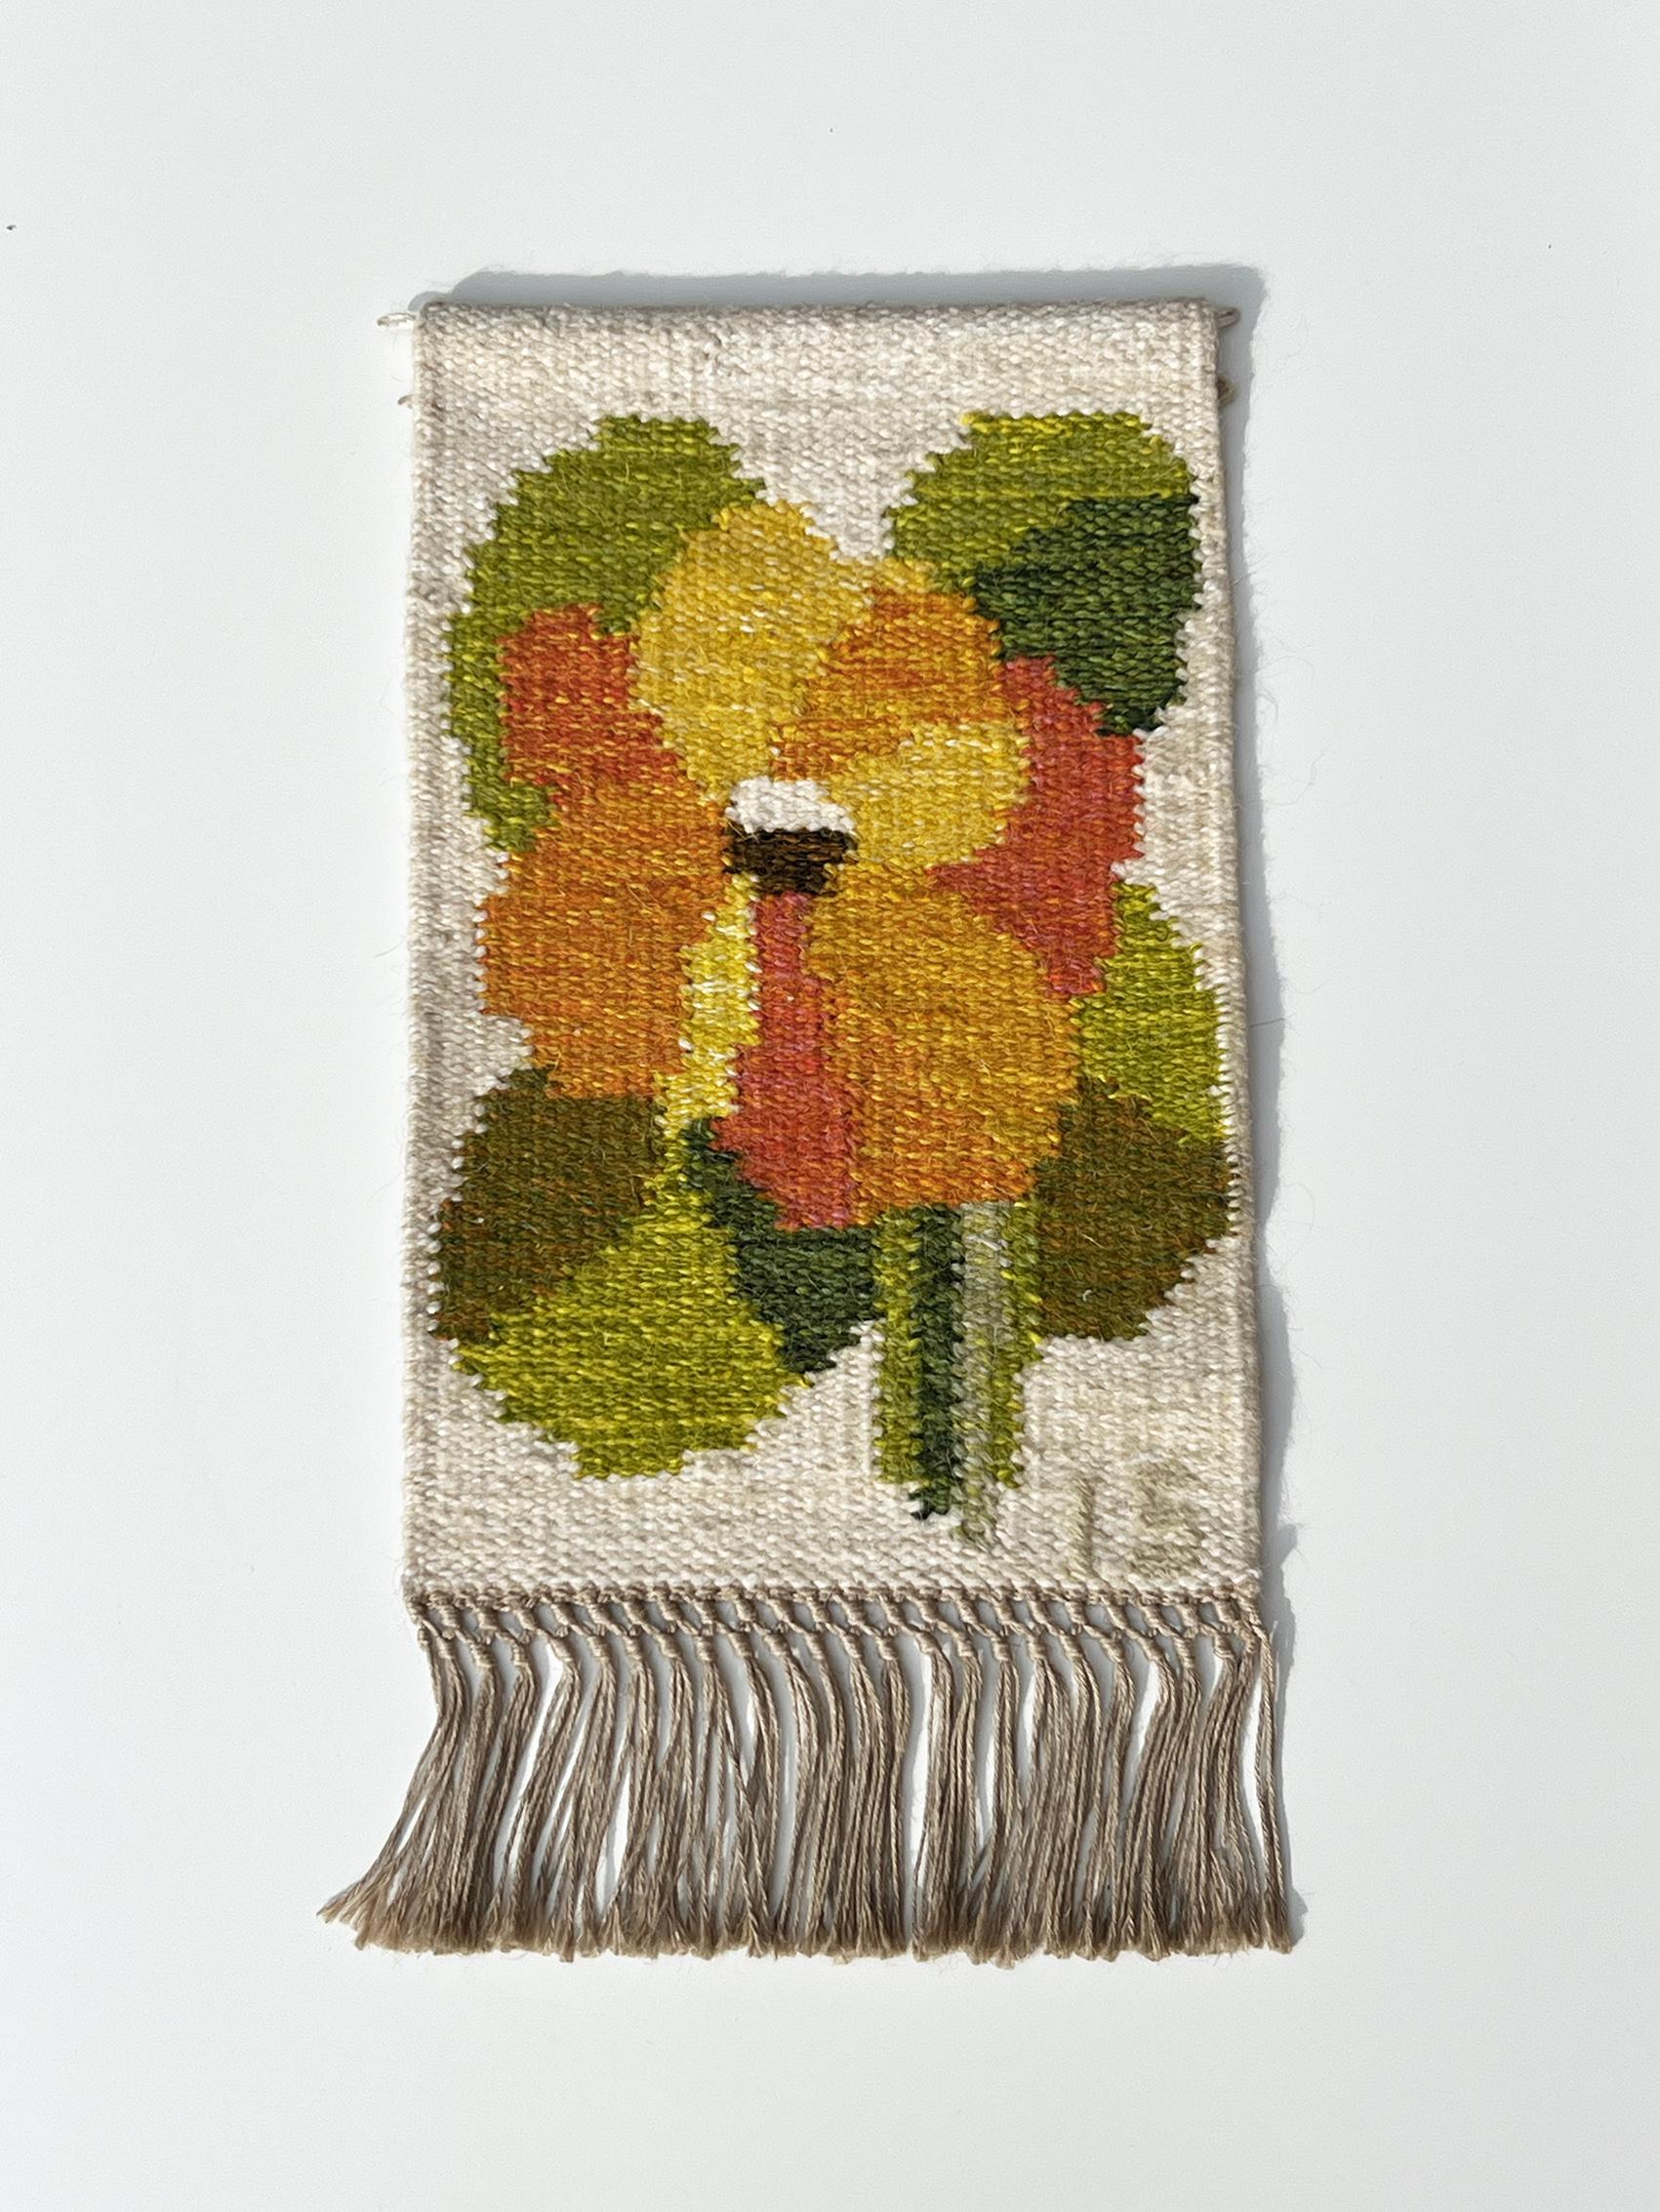 Handwoven wall hanging ”Krasse” rölakan, by Ingegerd Silow. Signed IS. 
Measurements on the back of the wall hanging says 28x40 cm, measurements with the fringes 28x55 cm.
Good vintage condition, wear and patina consistent with age and use. 
